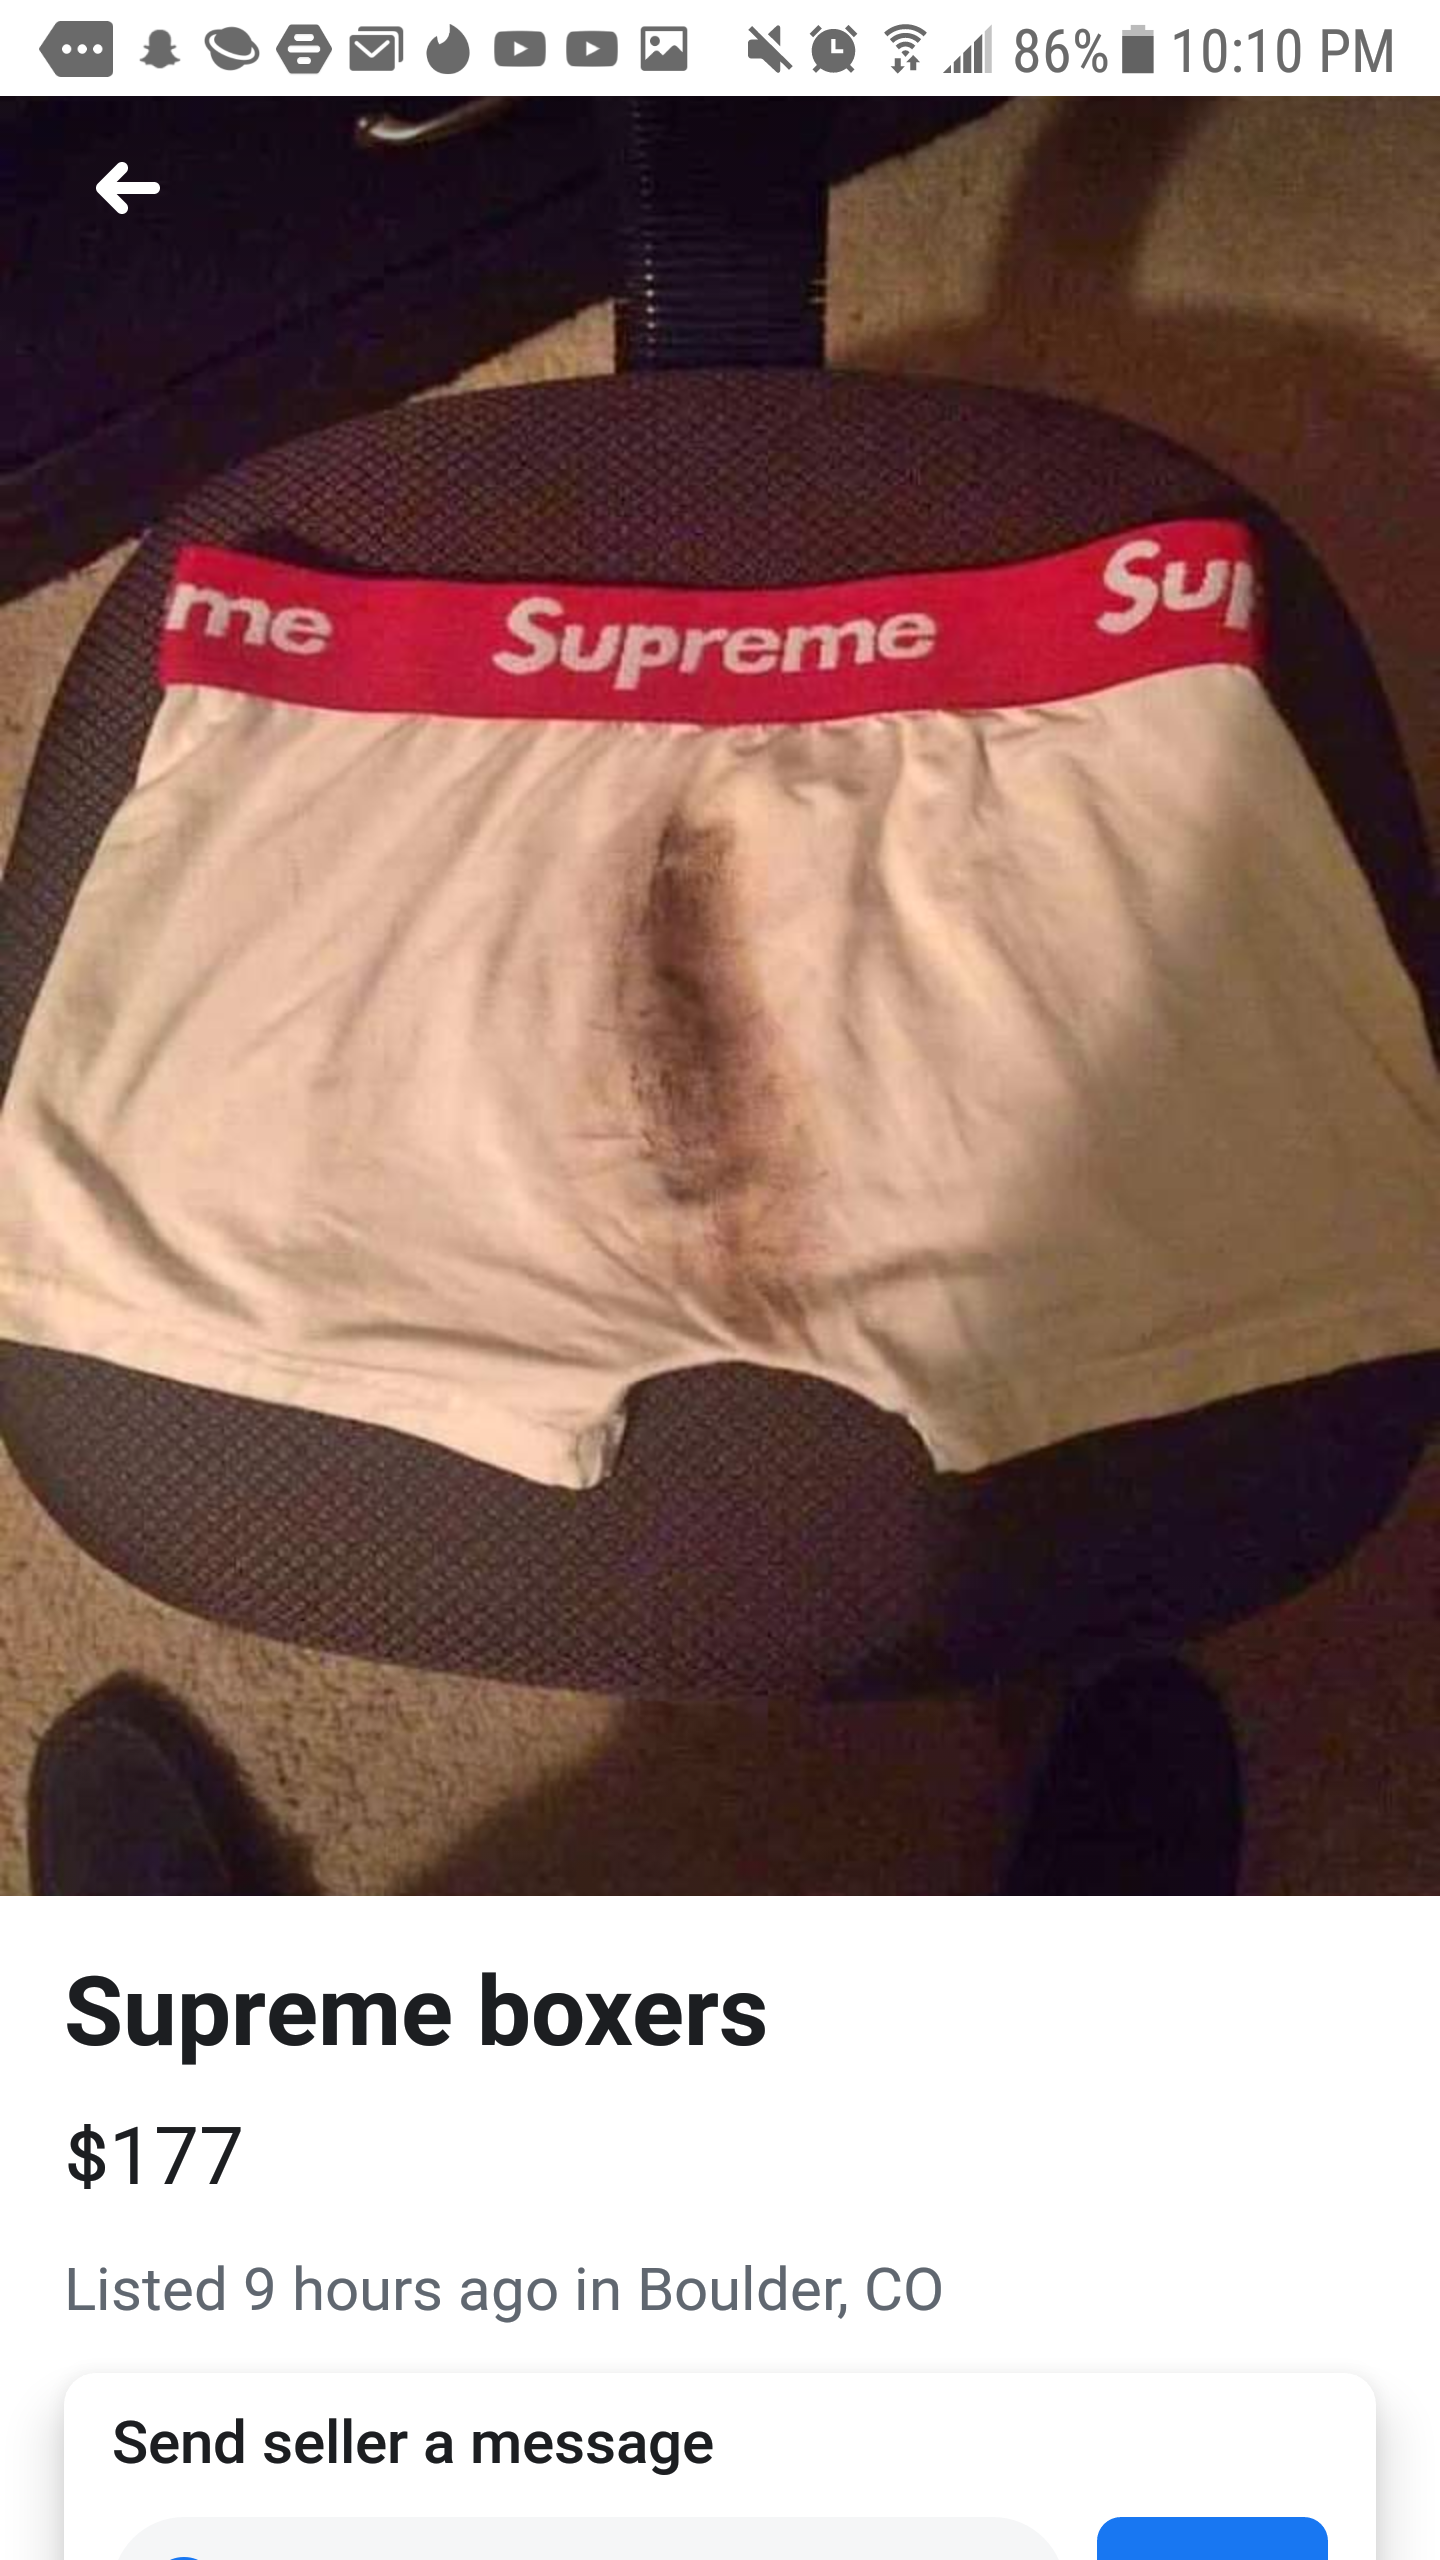 doo doo underwear - me Supreme Supreme boxers $177 Listed 9 hours ago in Boulder, Co Send seller a message